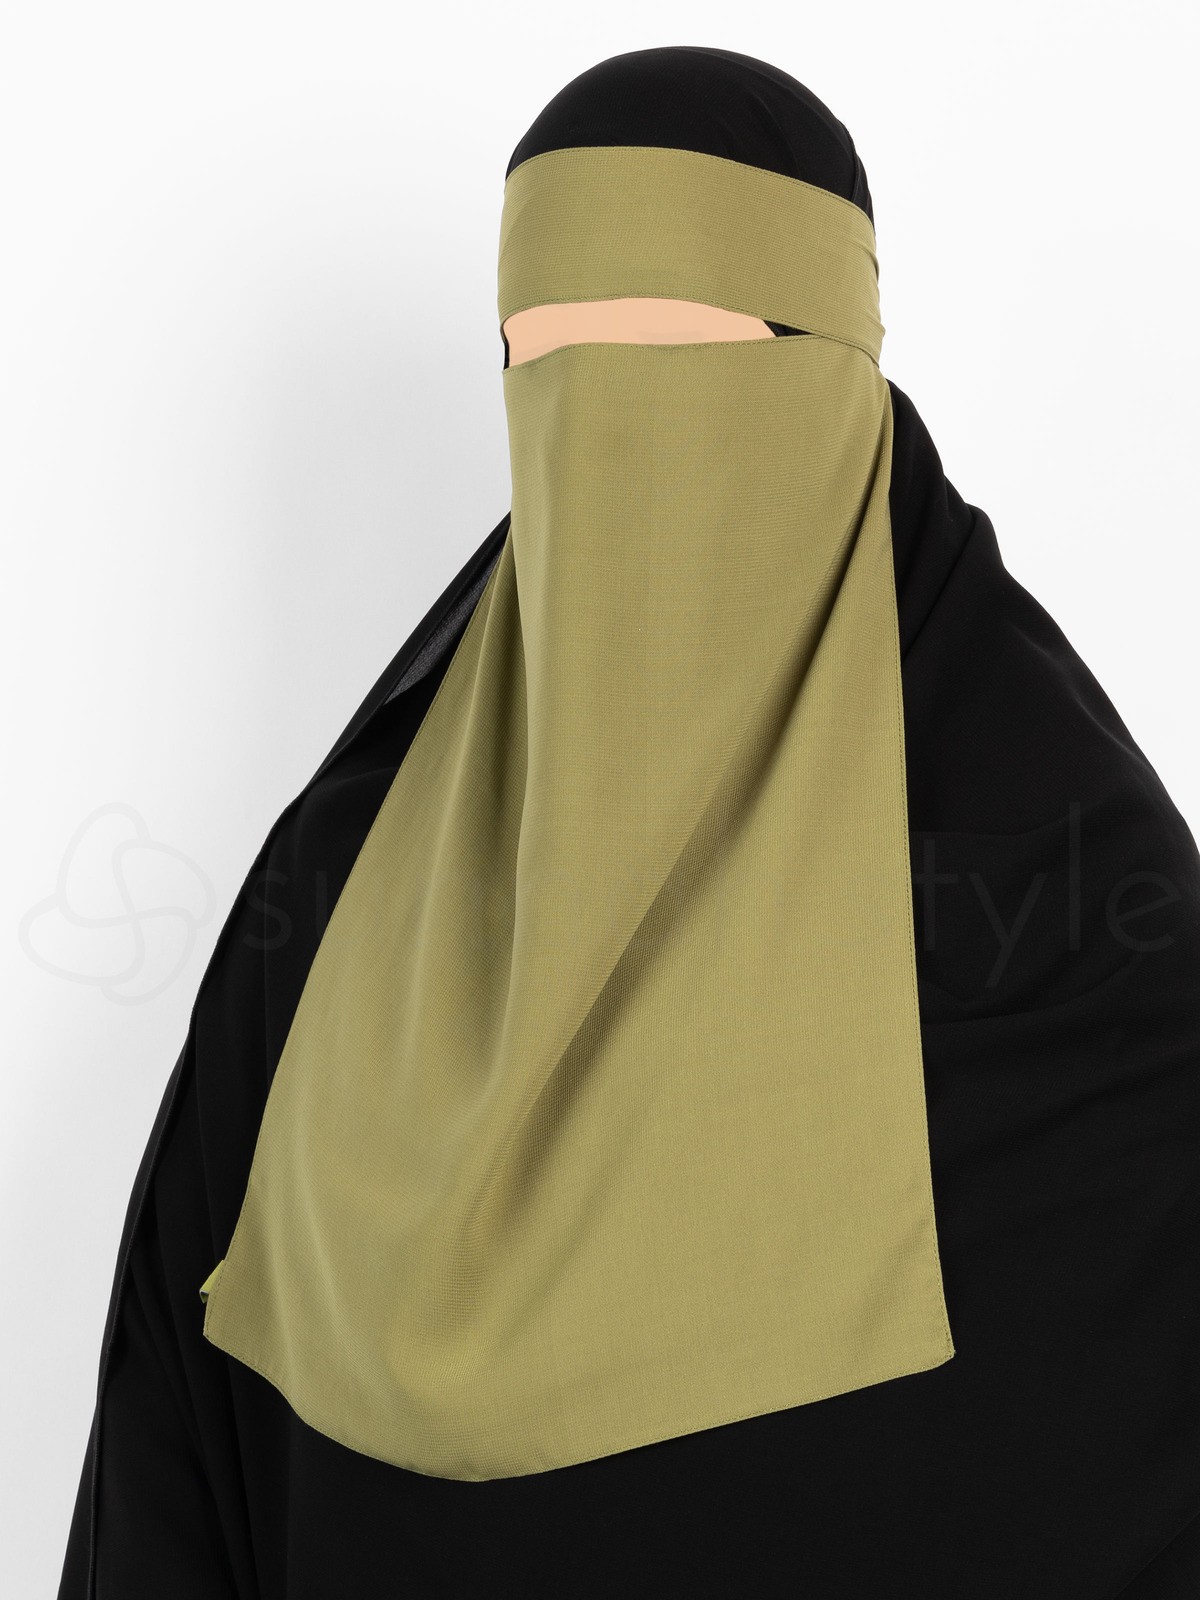 Sunnah Style - Pull-Down One Layer Niqab (Moss)